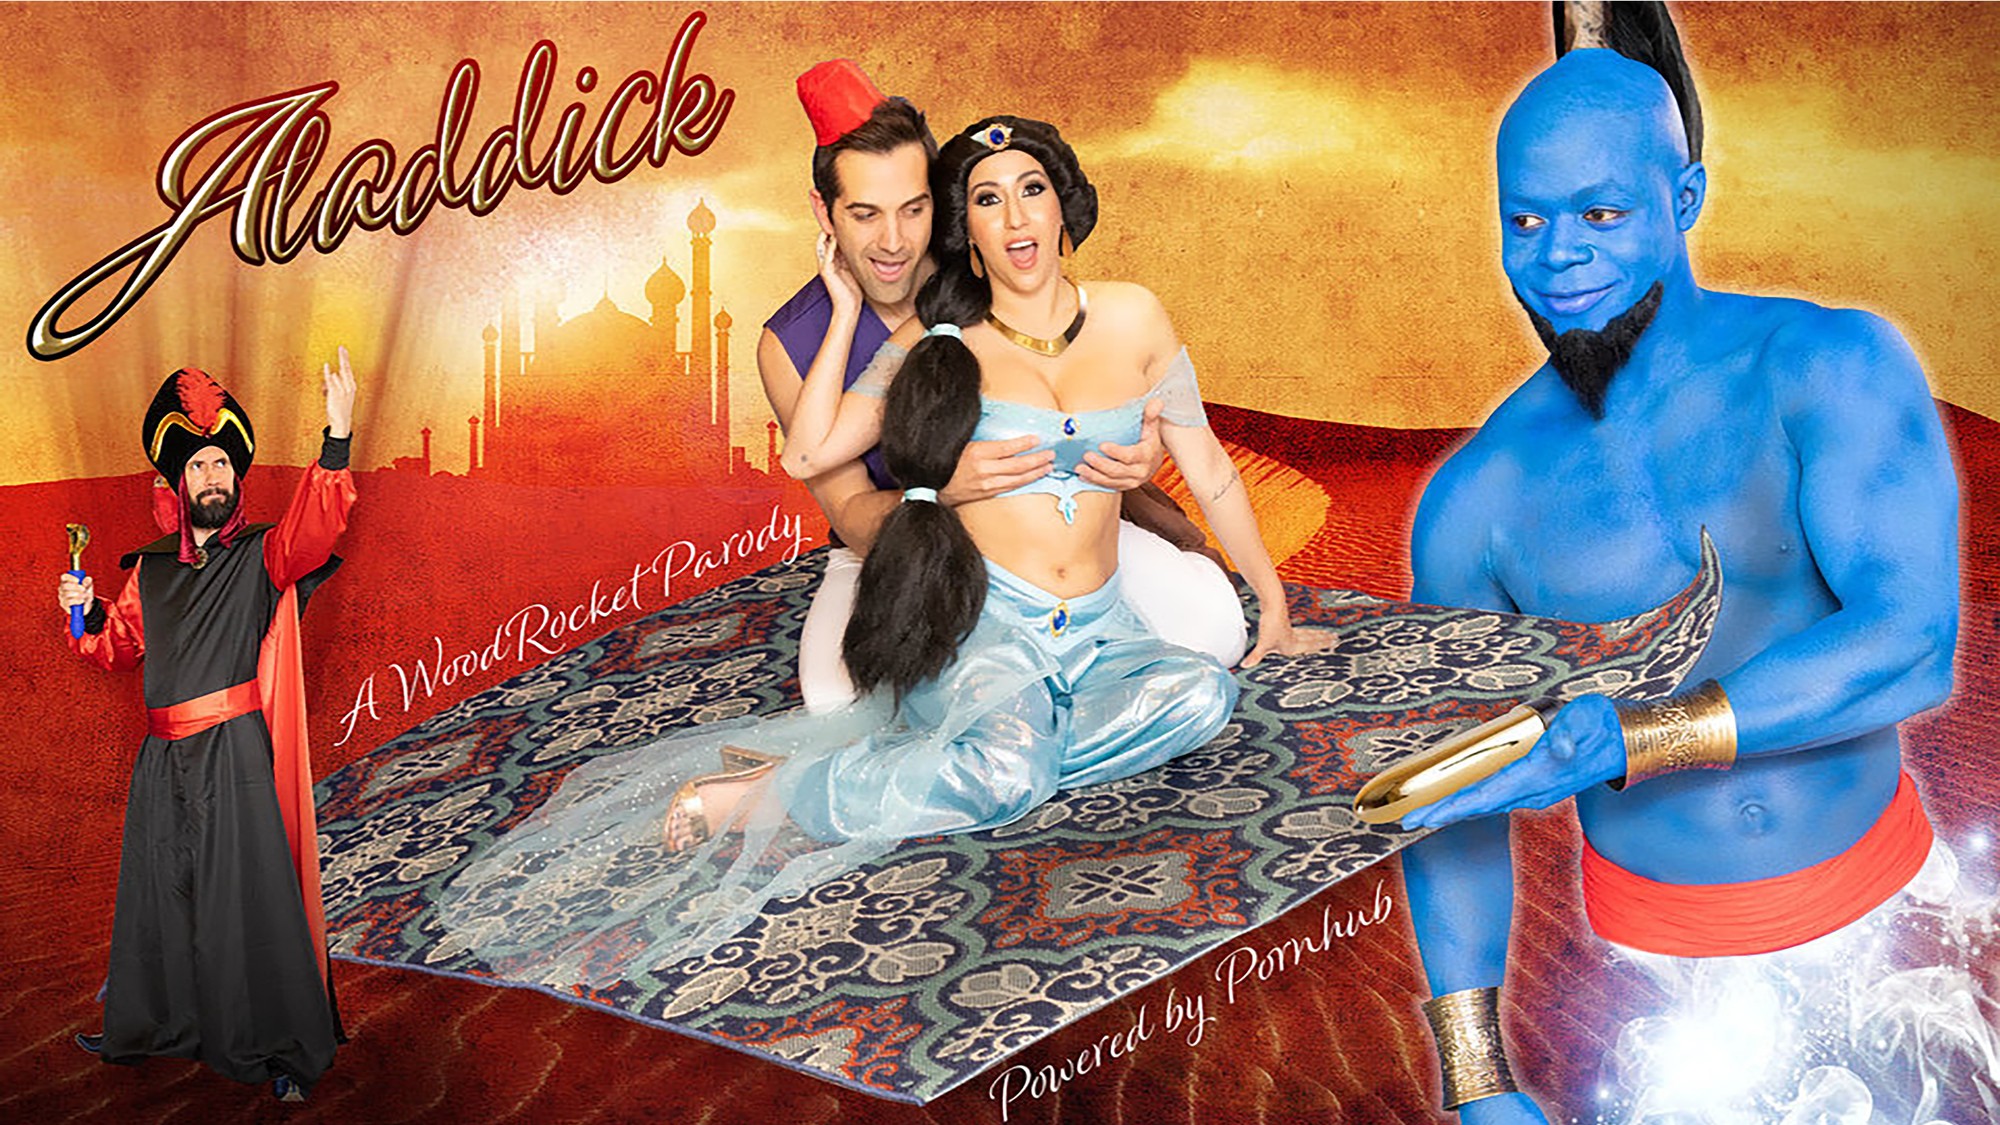 Bones Parody - The 'Aladdin' Porn Parody Is Here and We Fixed Its Title - VICE